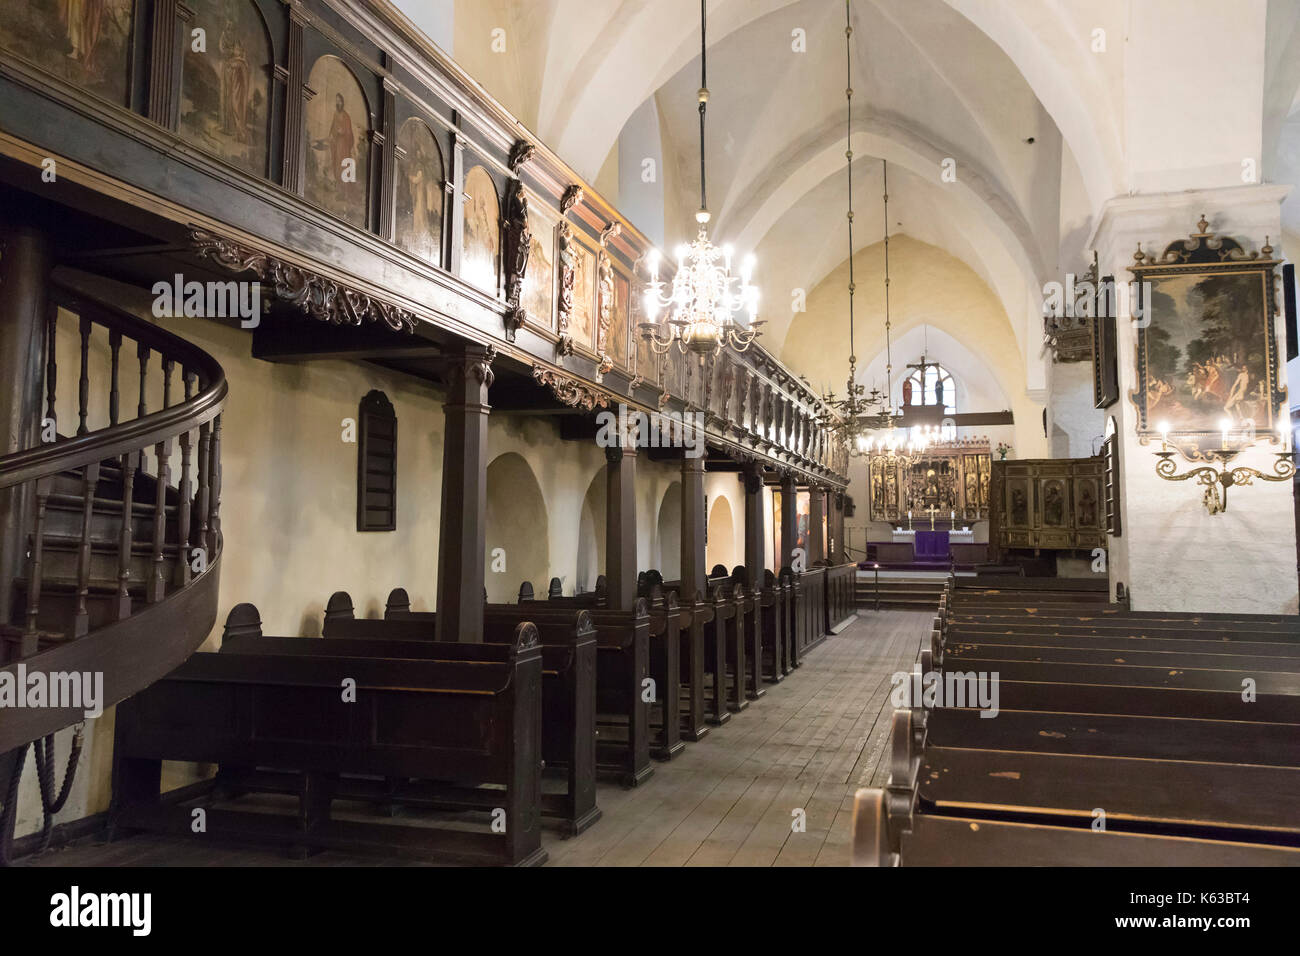 Interior of the Church of the Holy Ghost, Old Town, Tallinn, Estonia, Europe Stock Photo